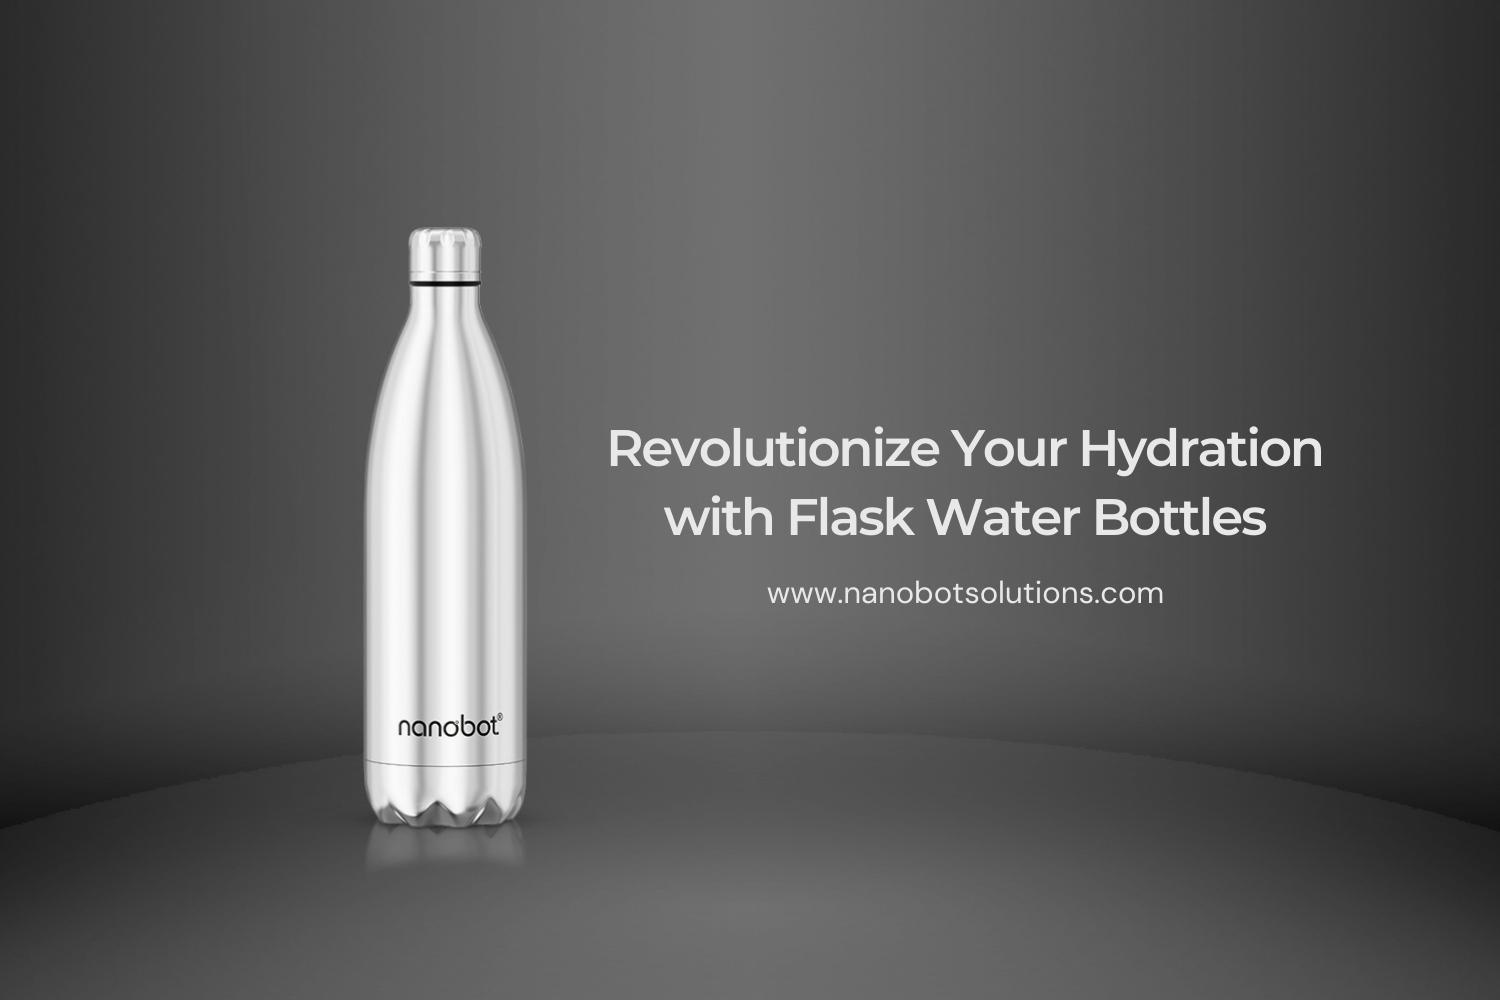 Revolutionize Your Hydration with Flask Water Bottles | Nanobot